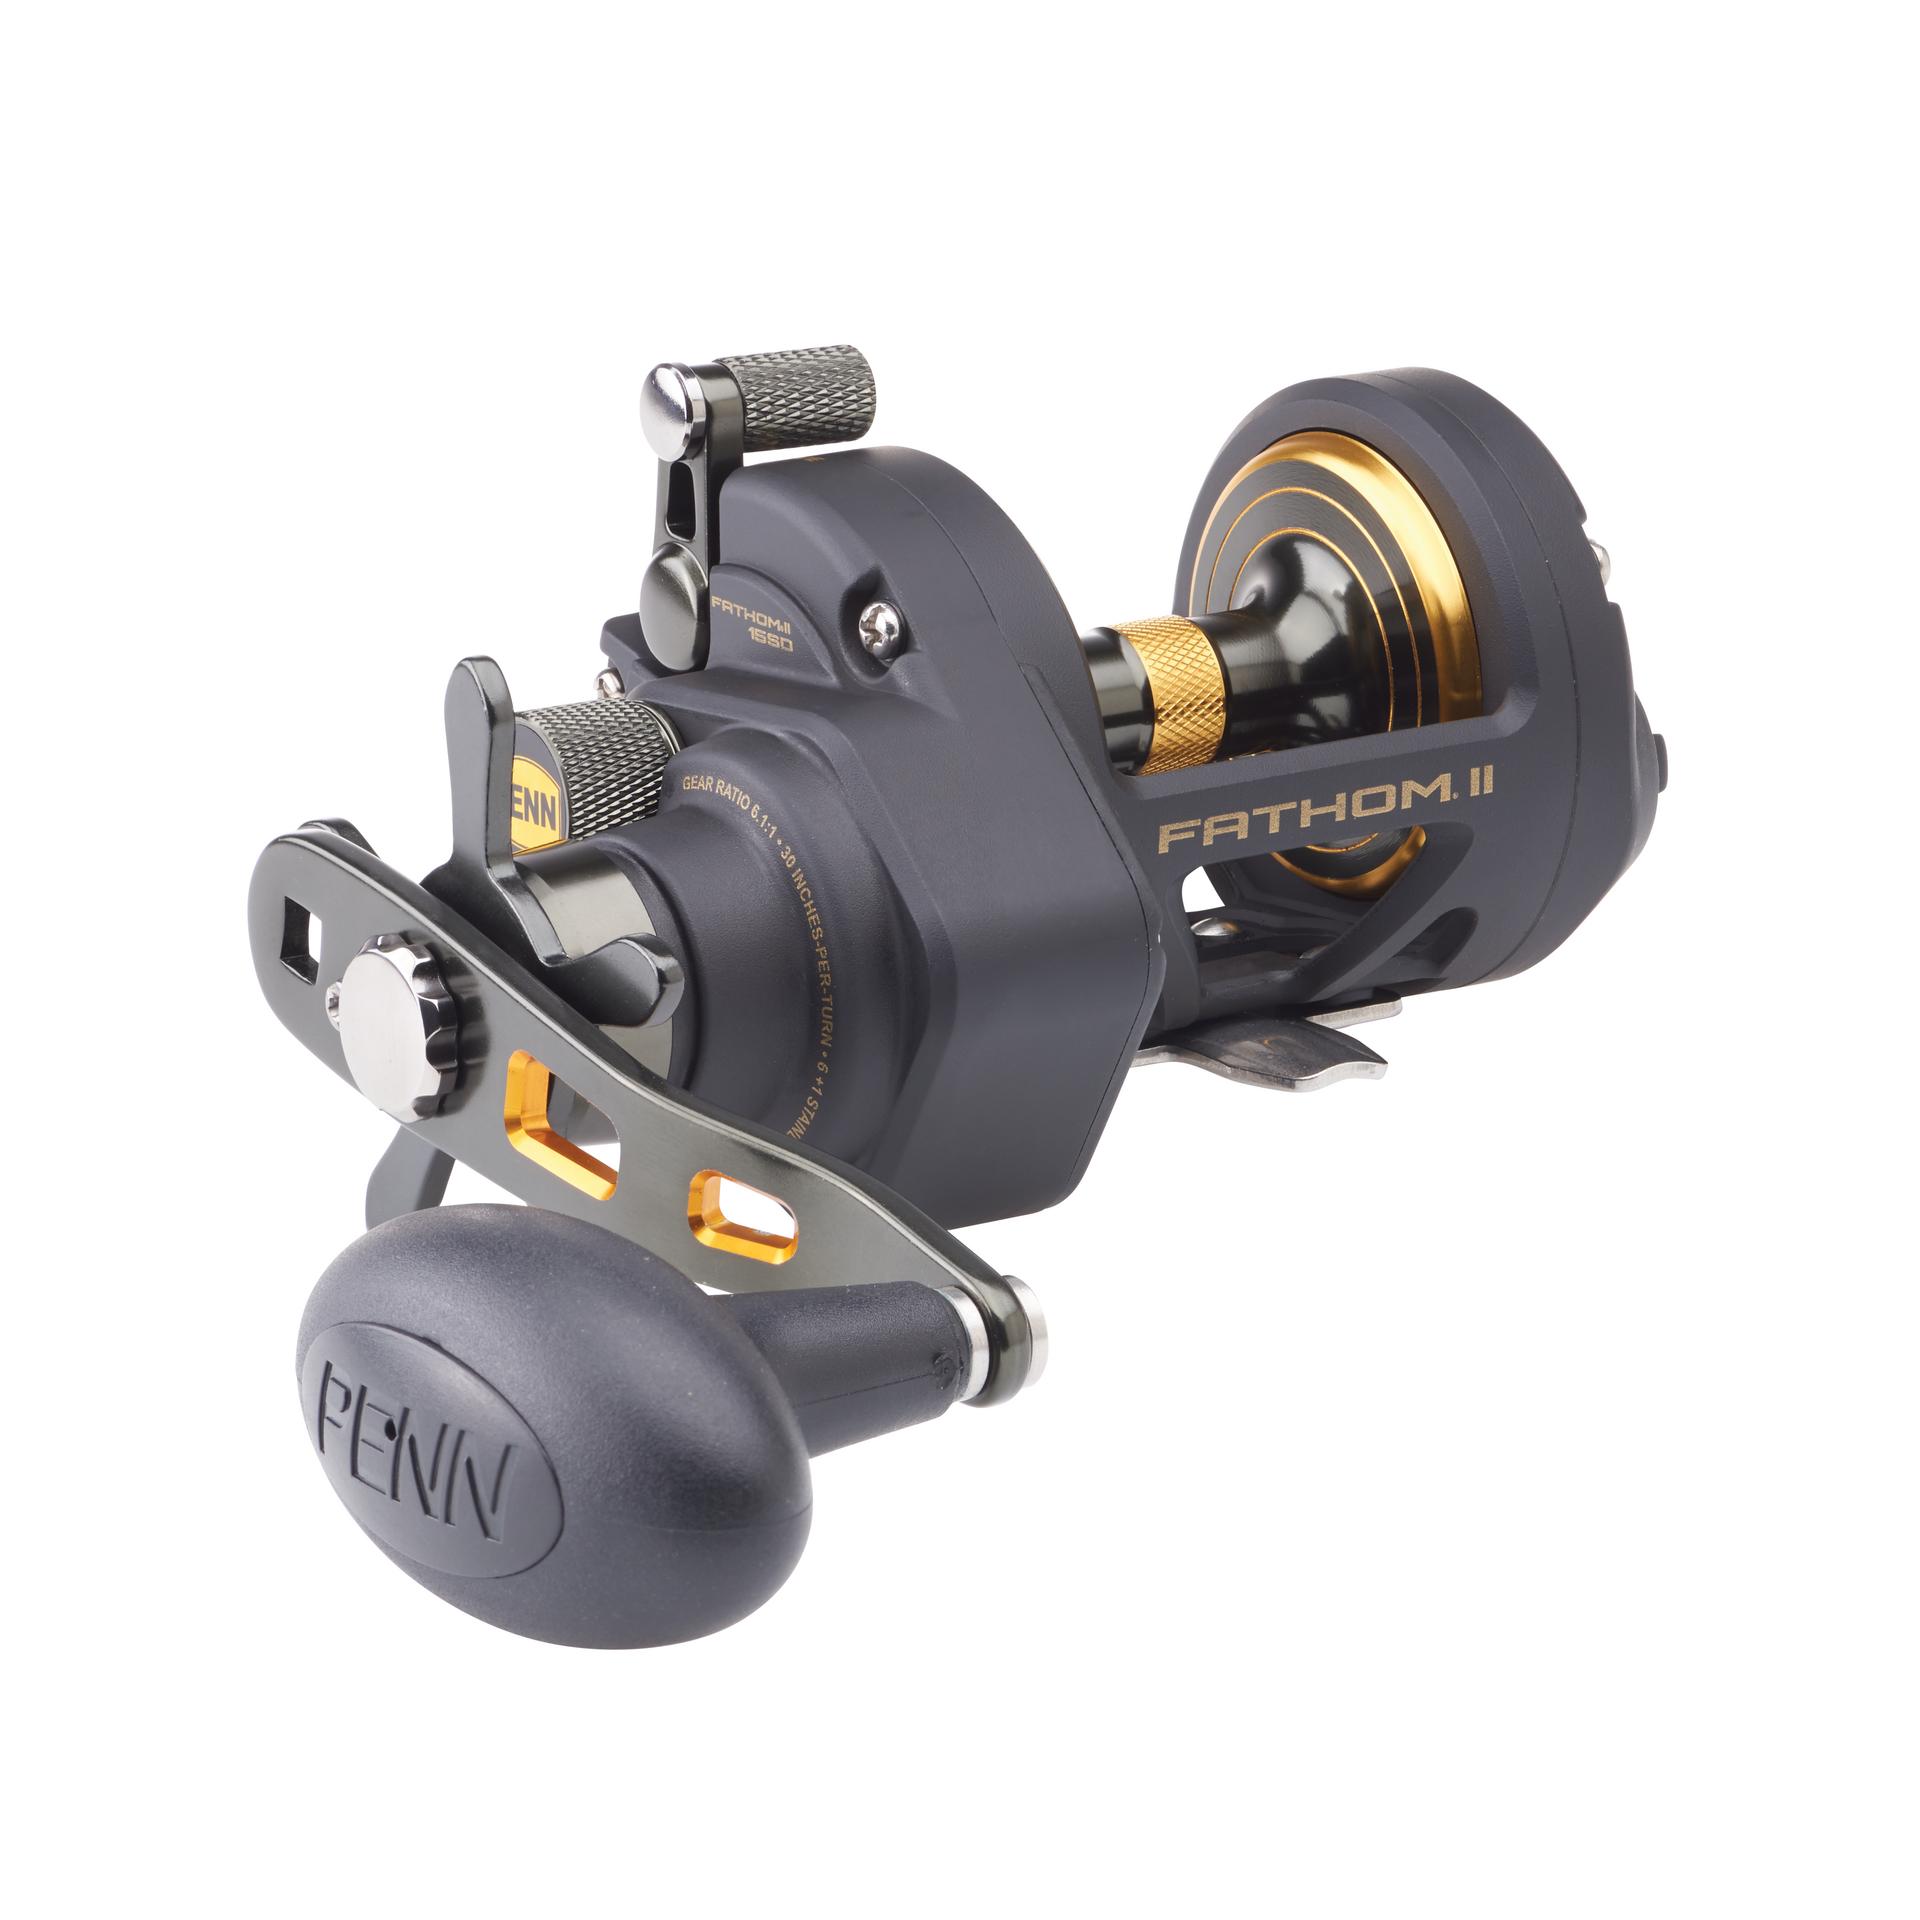 PENN Fathom® II 30 Conventional Reel with Line Counter